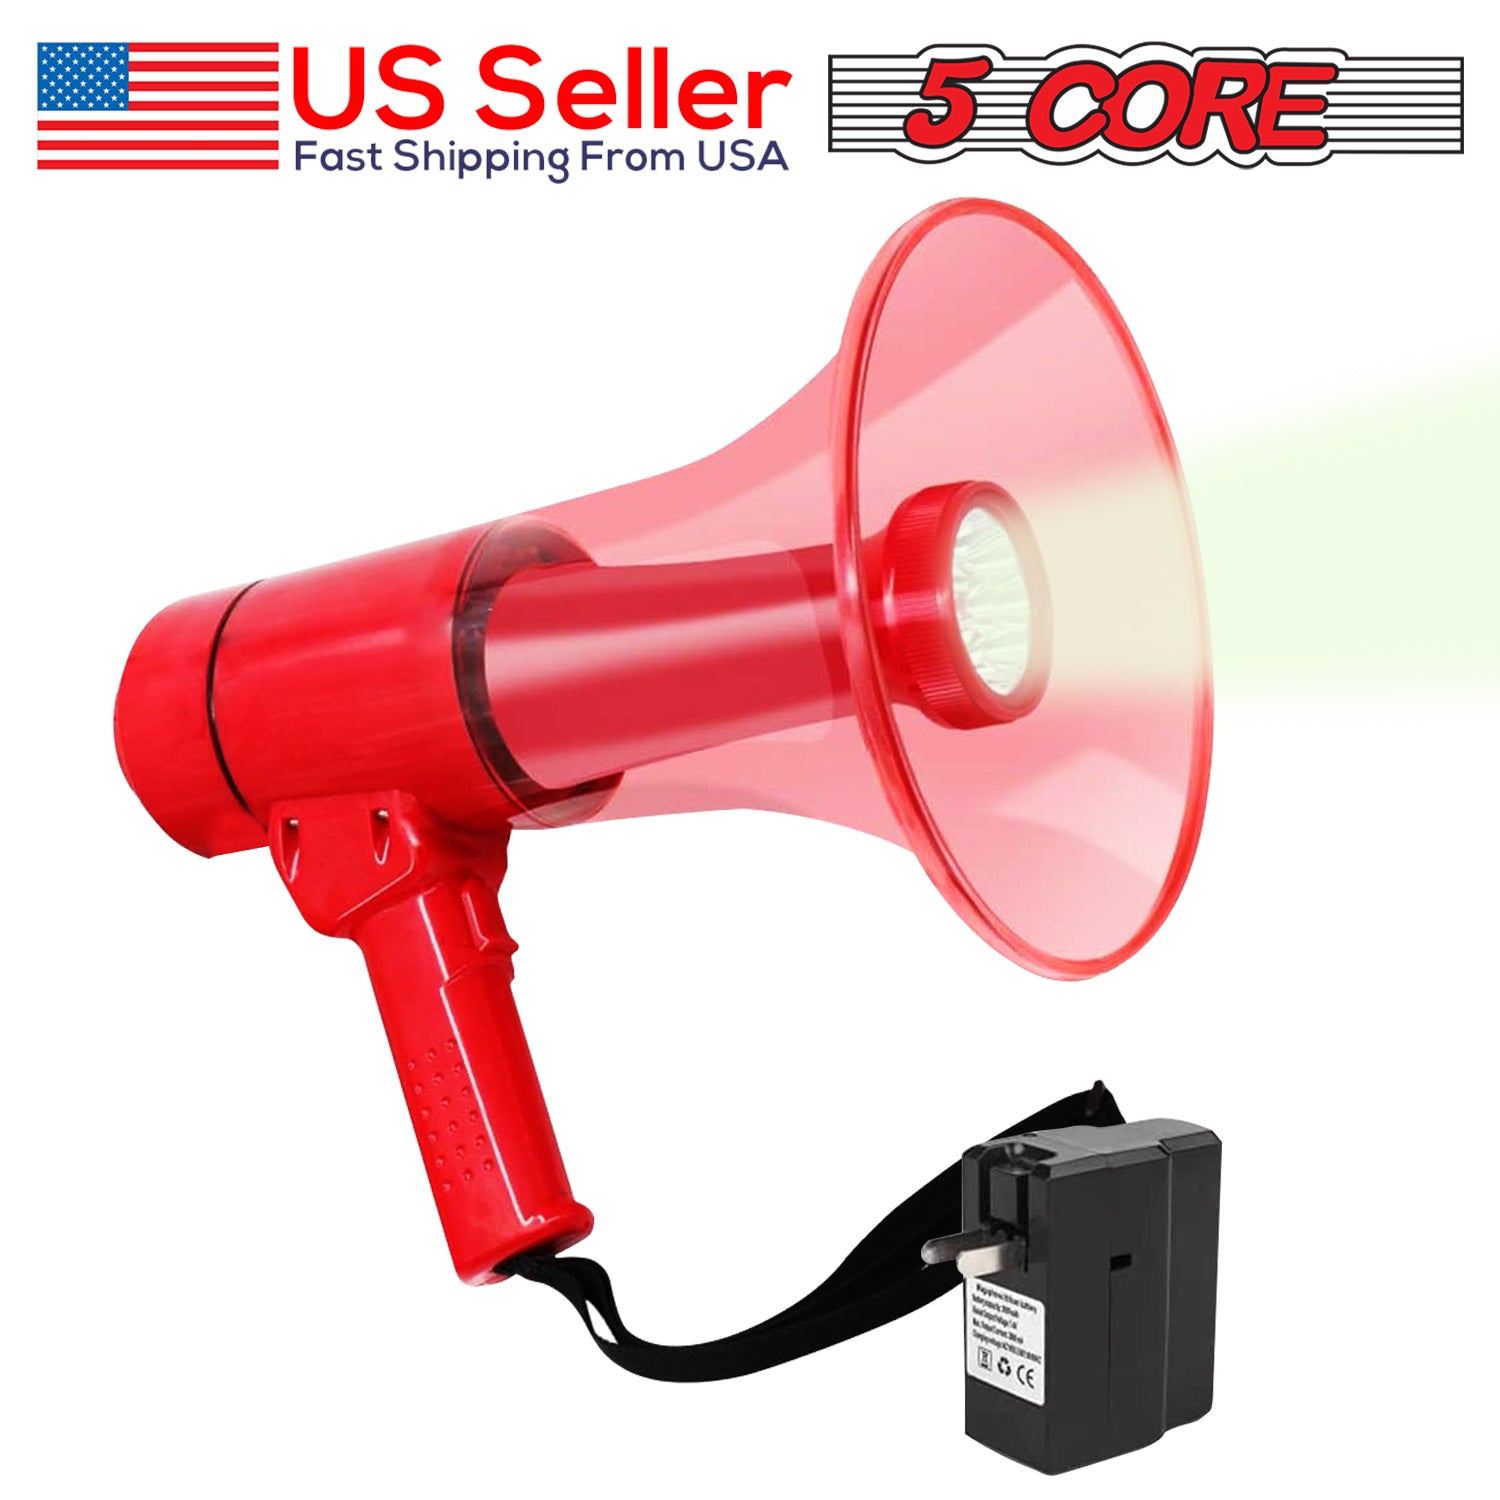 In-use perspective of the red 5 Core 50W bullhorn, demonstrating its versatility and reliability.